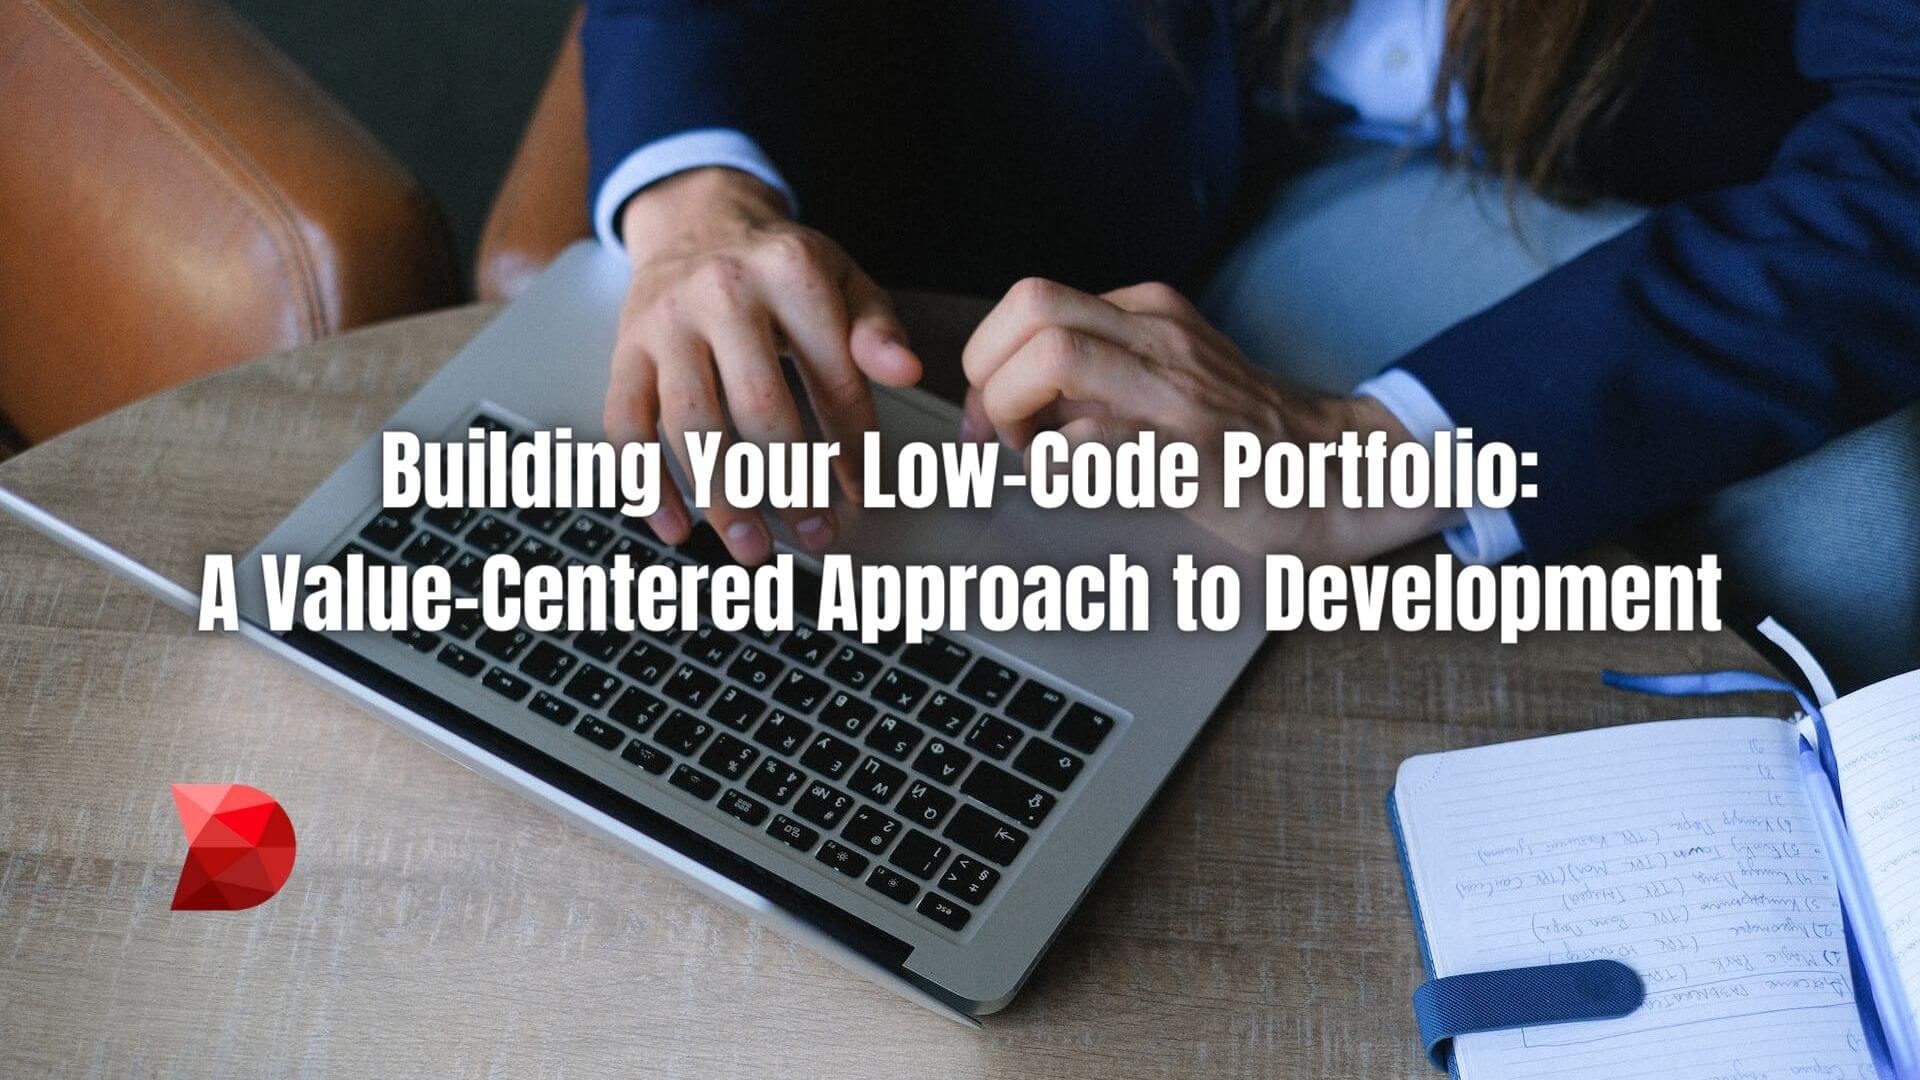 Create an impressive low-code portfolio! Learn step-by-step strategies in this comprehensive guide for crafting your standout portfolio.